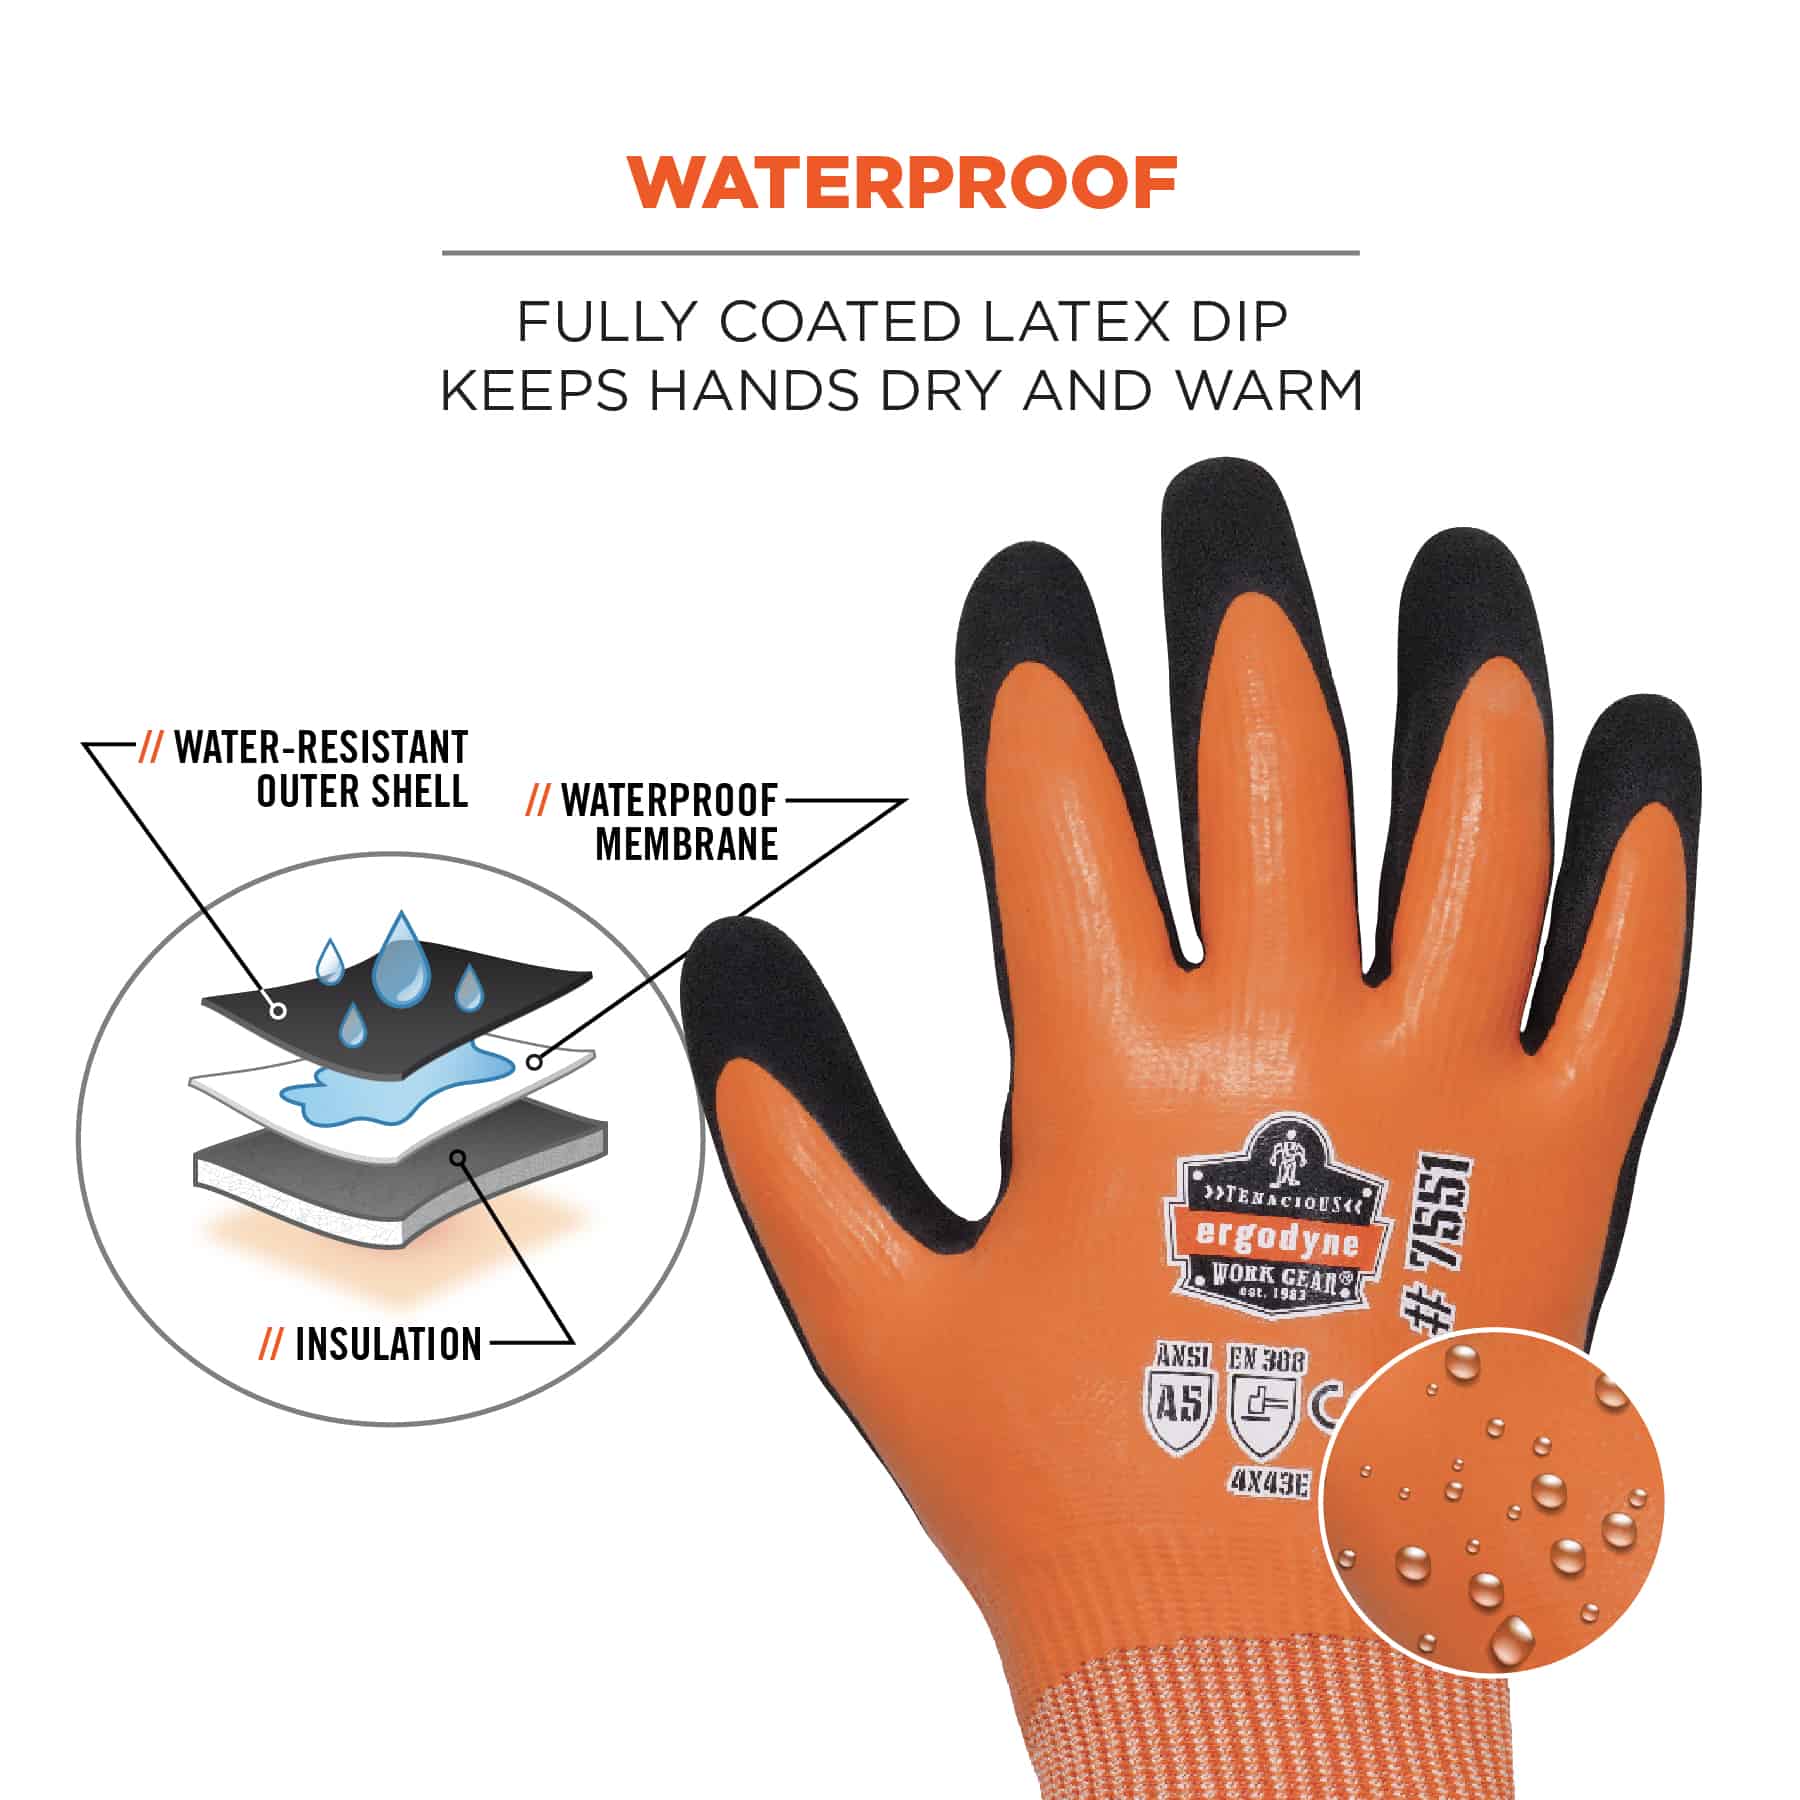 How to waterproof your winter gloves for warm, dry hands